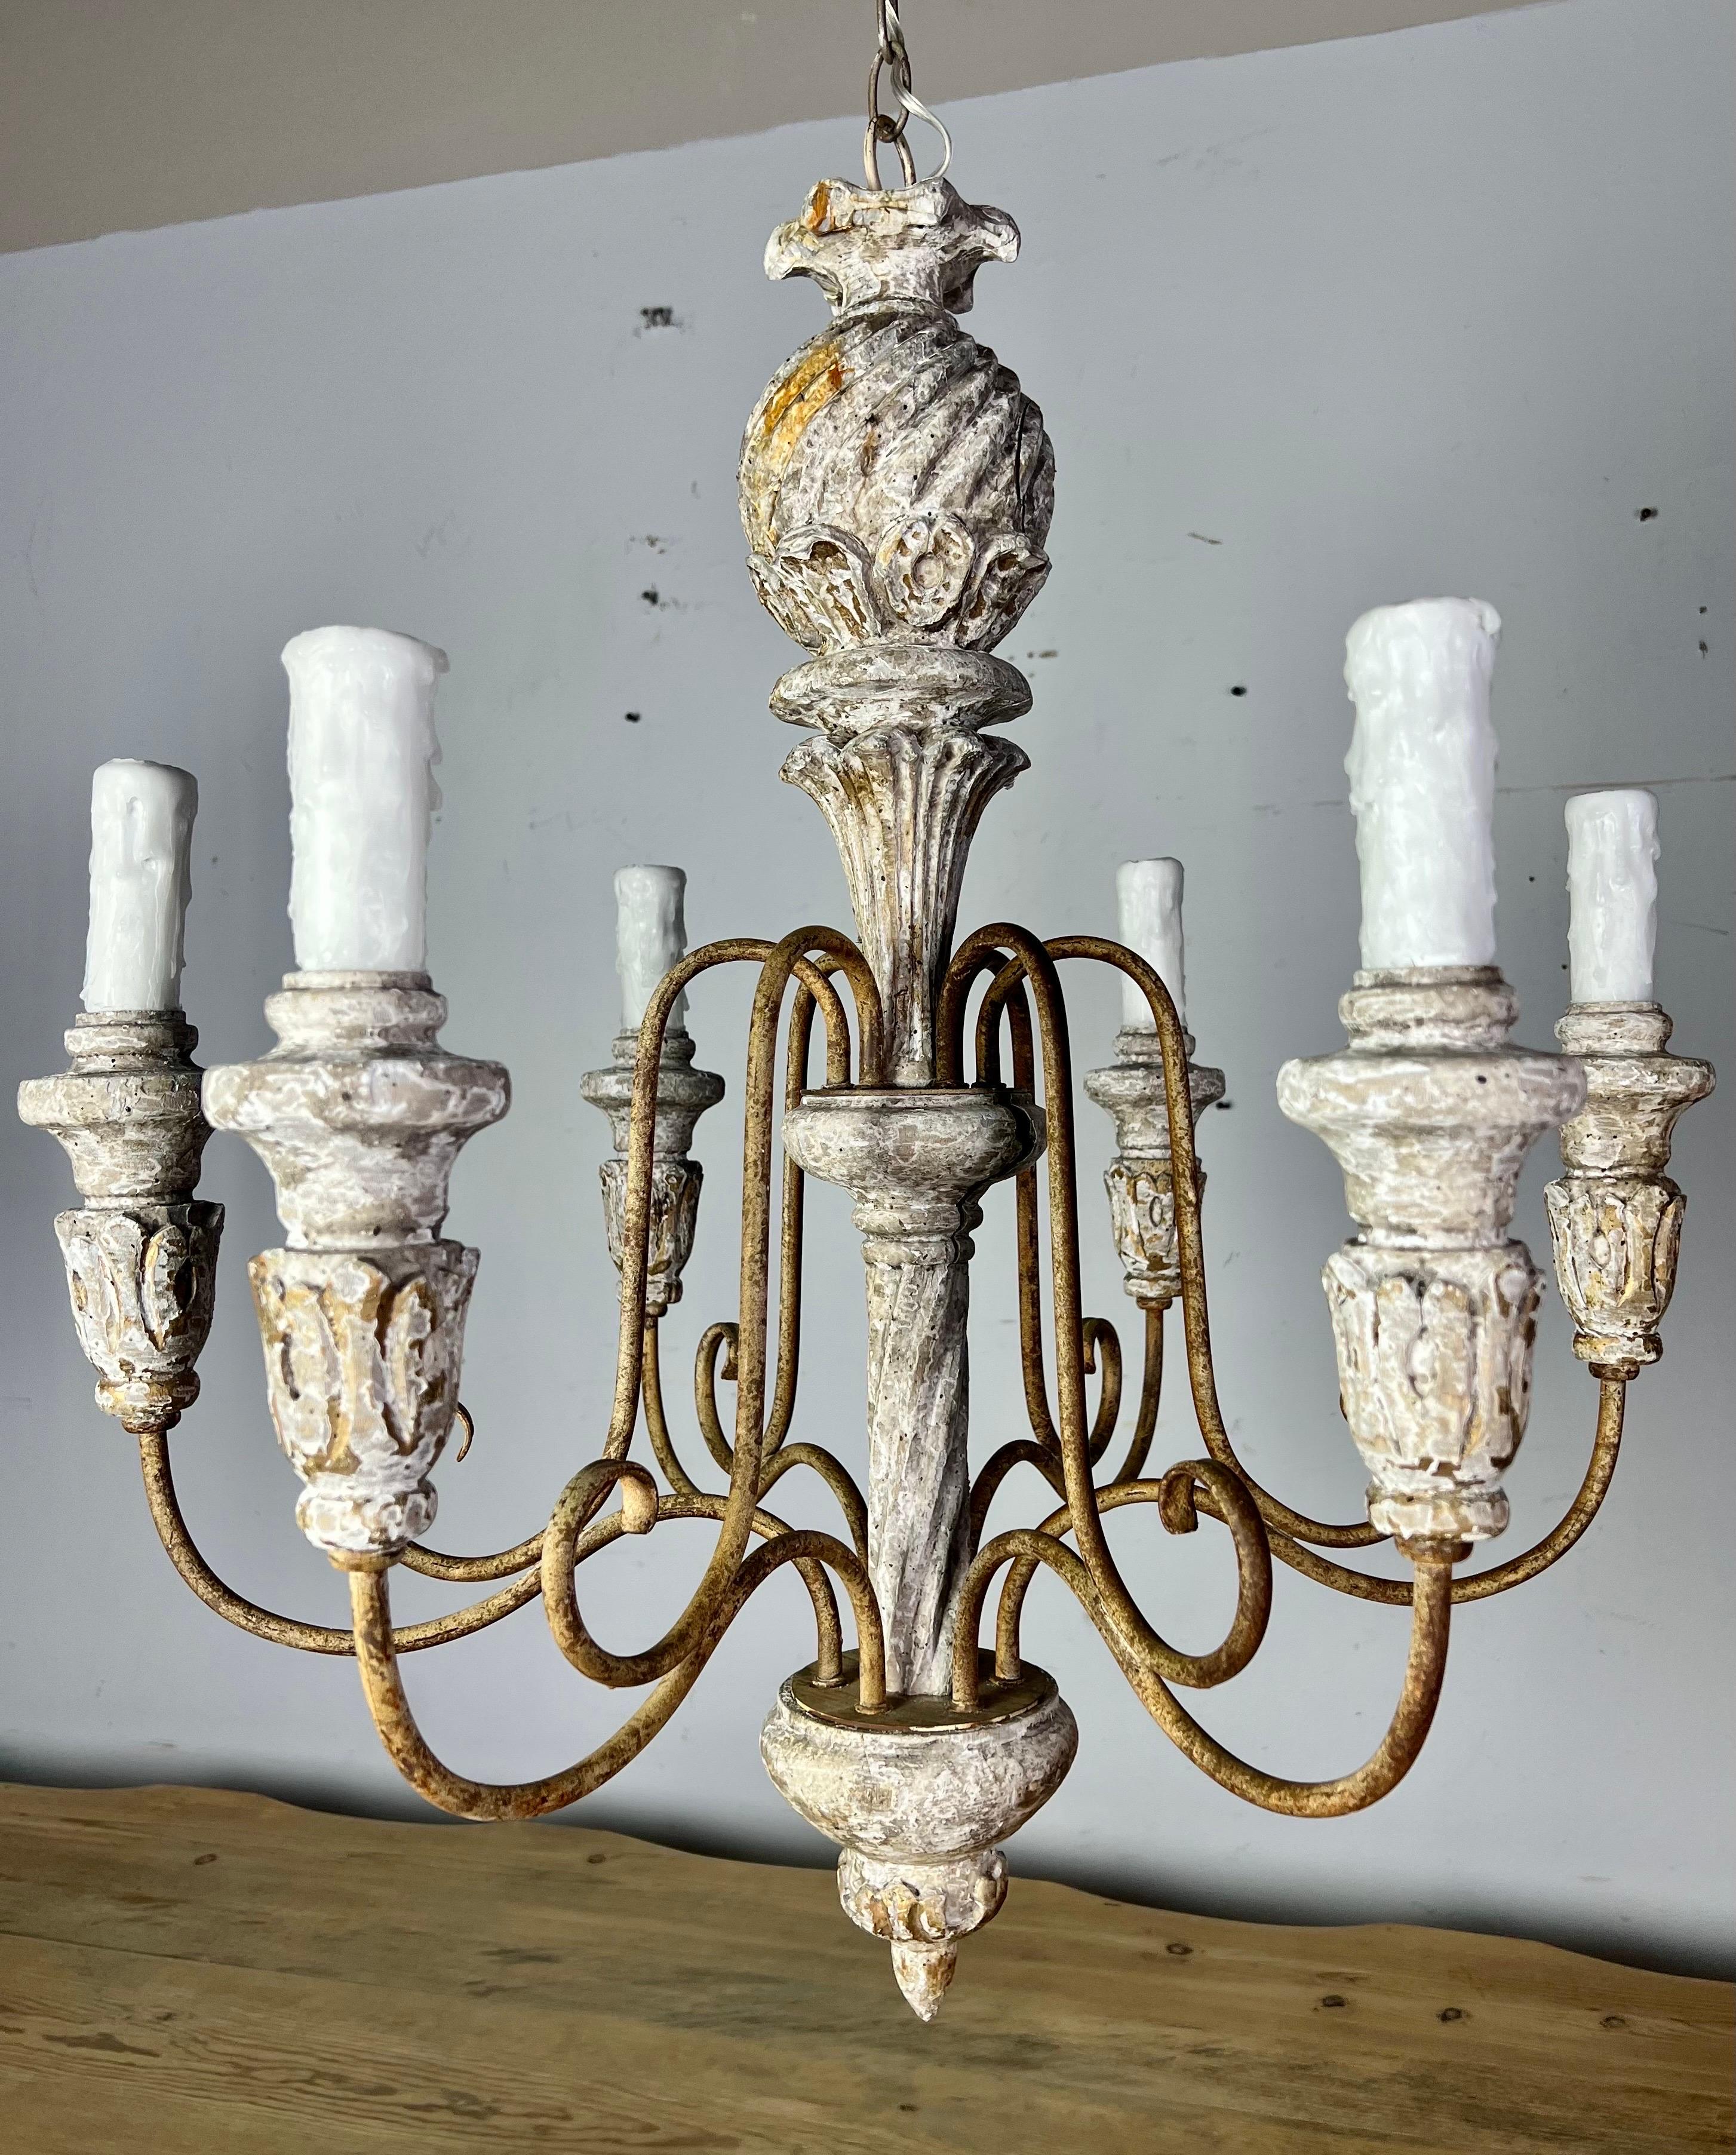 6-light 1930s Swedish wood carved chandelier. The chandelier is painted in a distressed creamy grayish coloration. The fixture has six iron arms. It is newly rewired with drip wax candle covers. Includes chain & canopy.